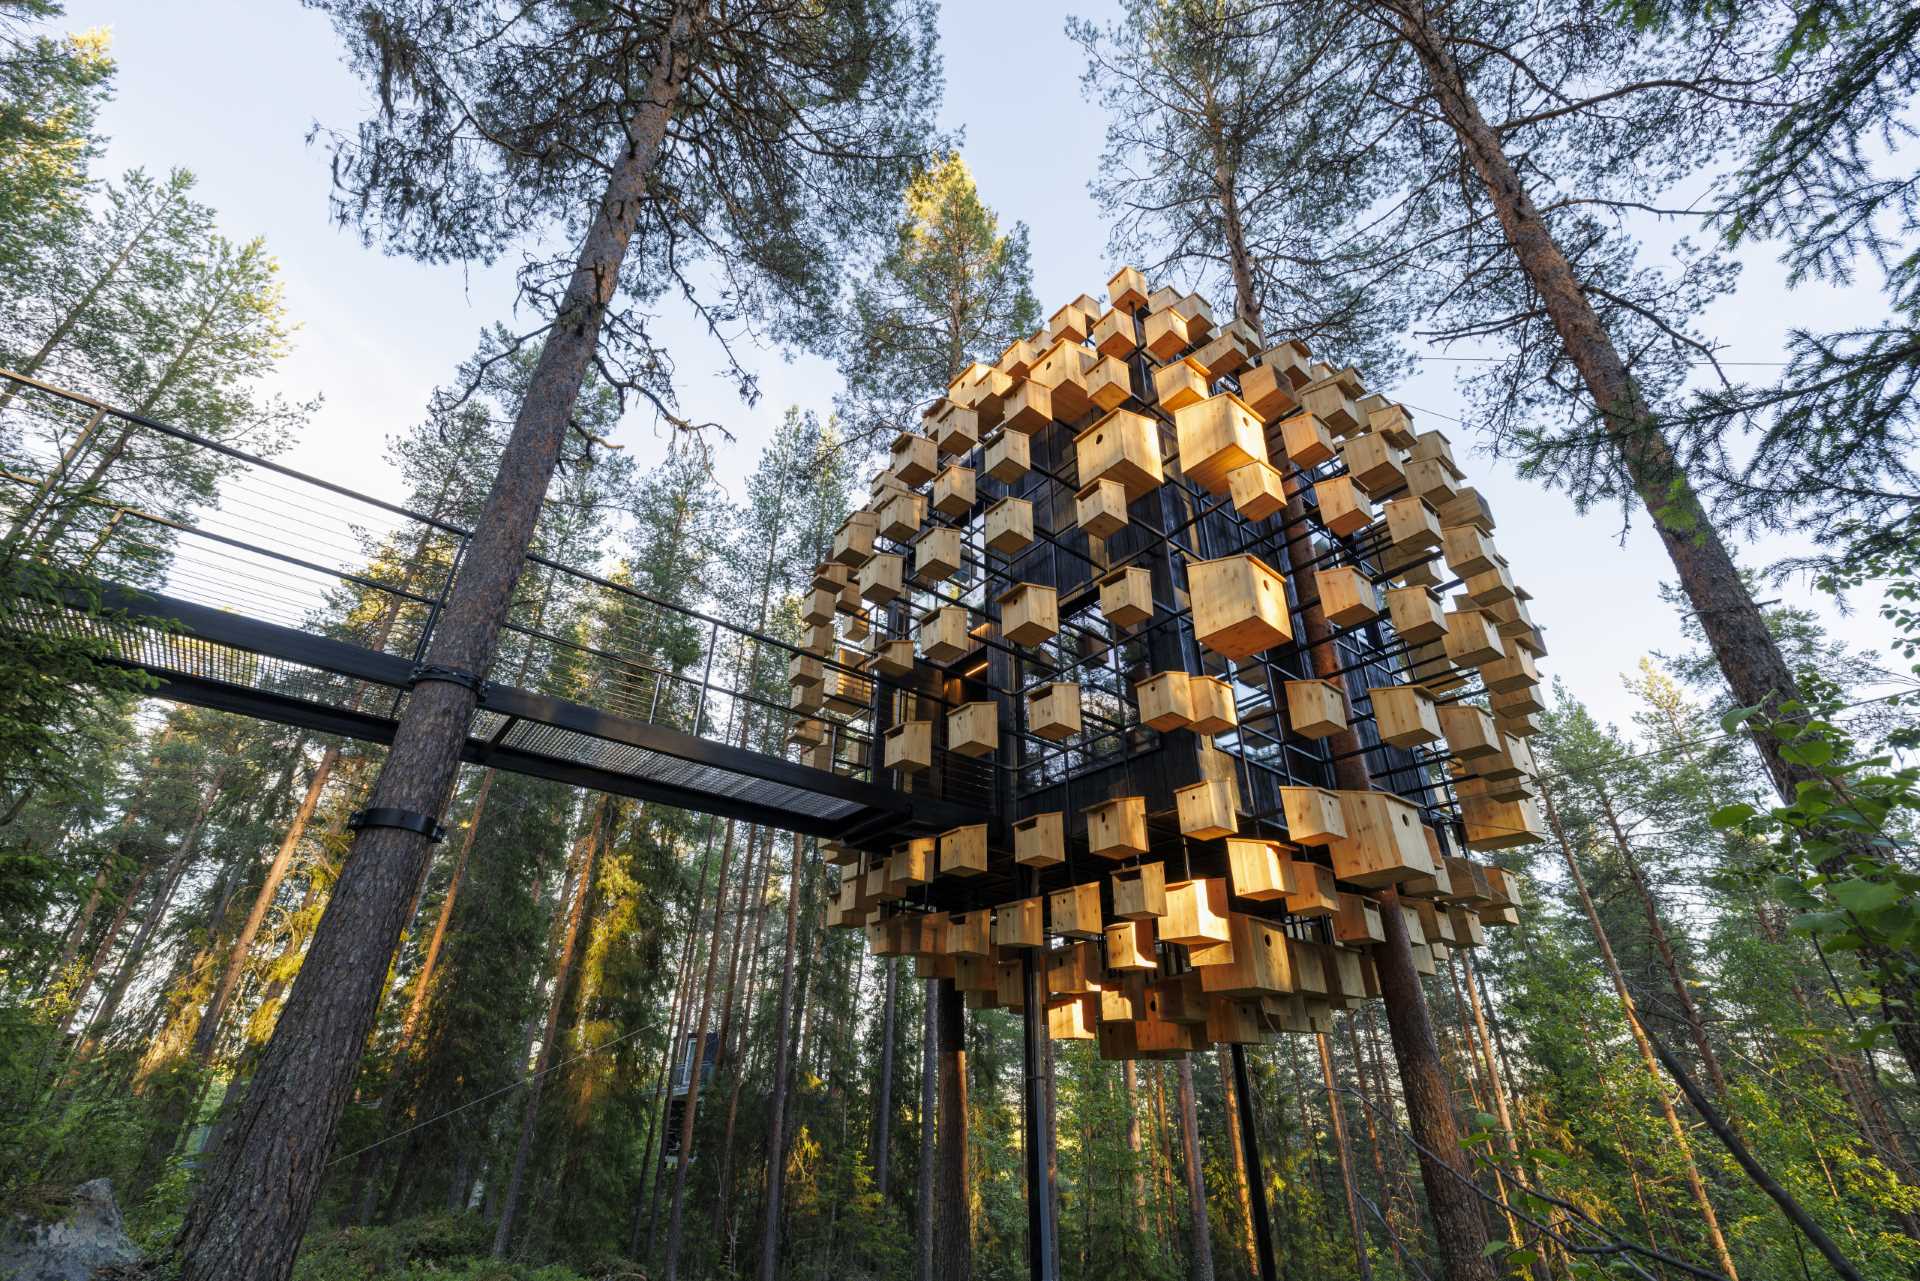 A suspended hotel room covered in 350 bird houses.